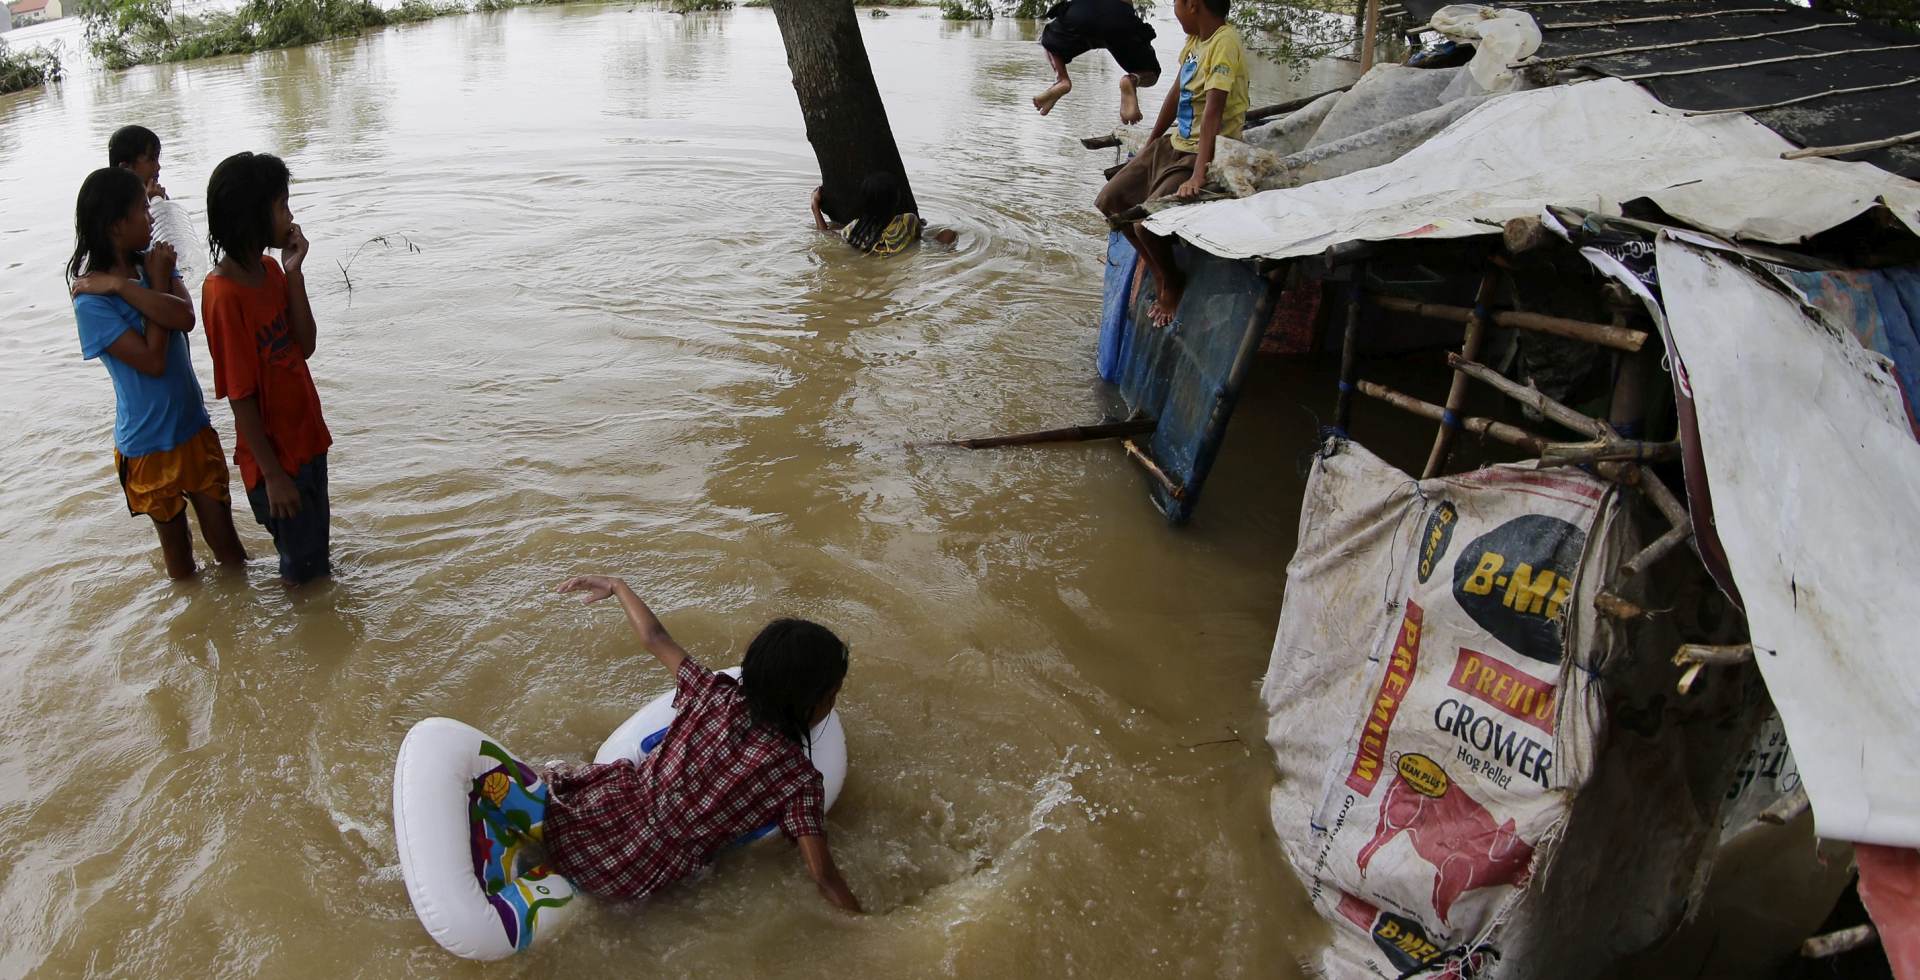 epa04984687 Although victims of the recent typhhon, Filipino children frolic next to a flooded shelter at the flood hit village of Santa Rosa, Nueva Ecija province, northern Philippines, 20 October 2015. Philippine emergency teams were attempting to reach victims stranded by flooding from Typhoon Koppu, and began clearing areas damaged by the storm which battered the north of the country. Soldiers, police officers and other emergency workers were dispatched to the northern province of Nueva Ecija, a rice-growing province where murky floodwaters reached up to rooftops in some places.  EPA/FRANCIS R. MALASIG